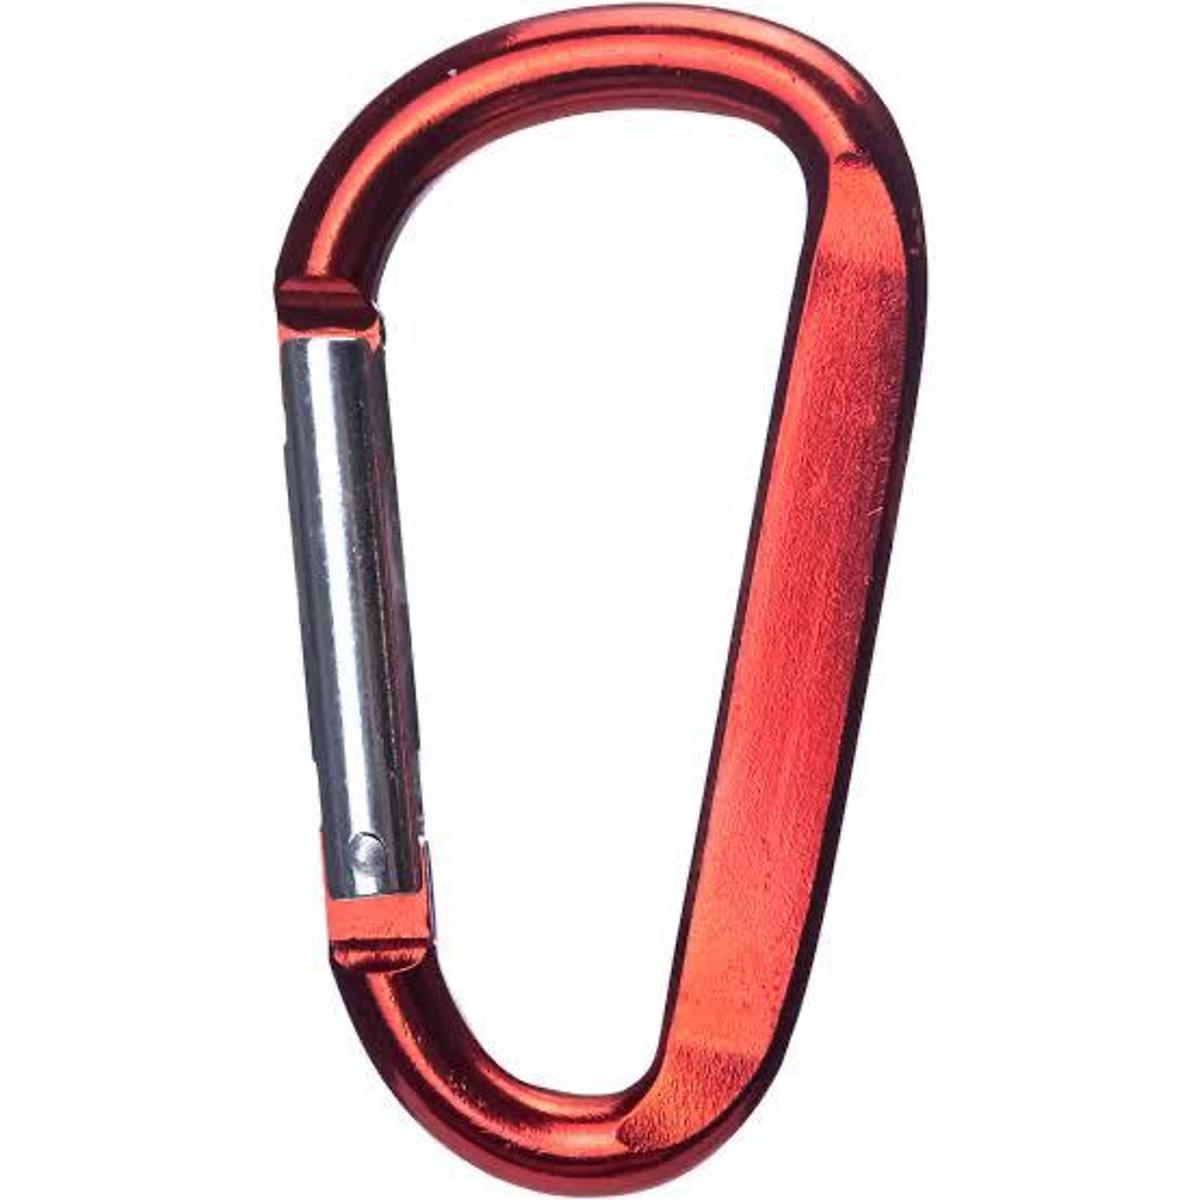 2' Aluminum D Ring Carabiners Clip D Shape Spring Loaded Gate Small Keychain  Set Outdoor Camping Mini Lock Snap Hooks Spring Link Key Chain Durable -  China Carabiner, Caribeaner Clip